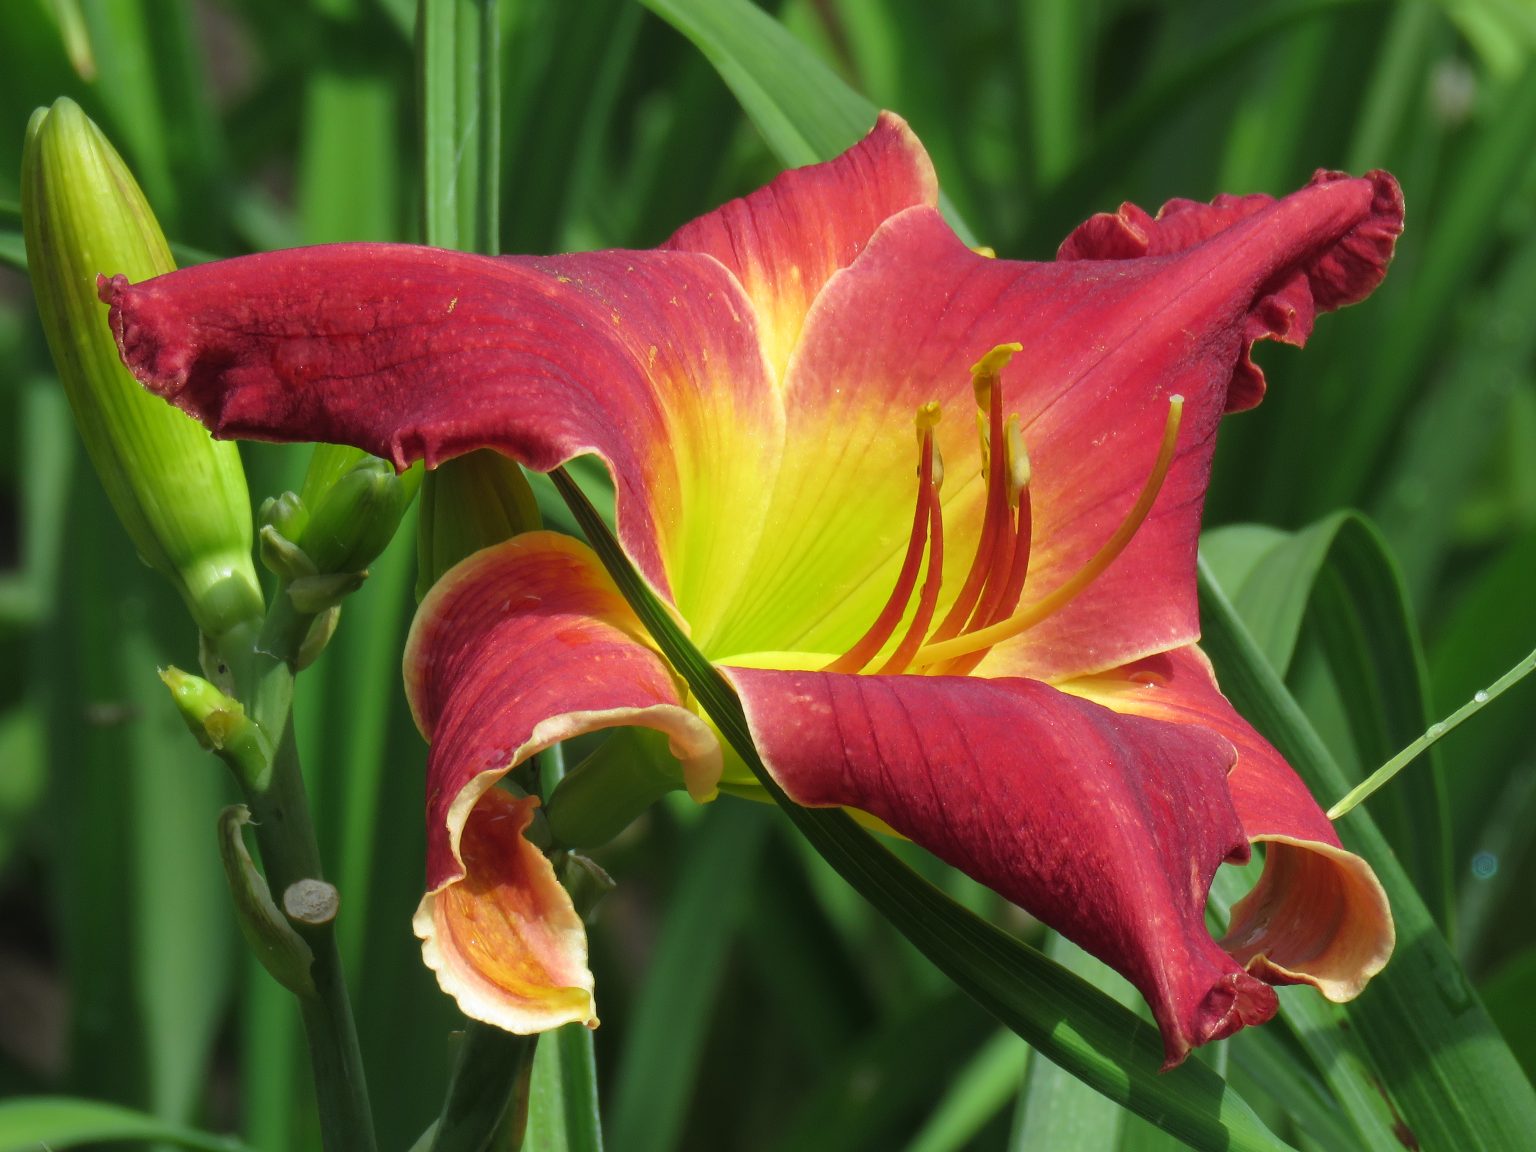 Whip City Cuddly Kitty Hardy Red Daylily for sale from Canada Lilyfield Farm